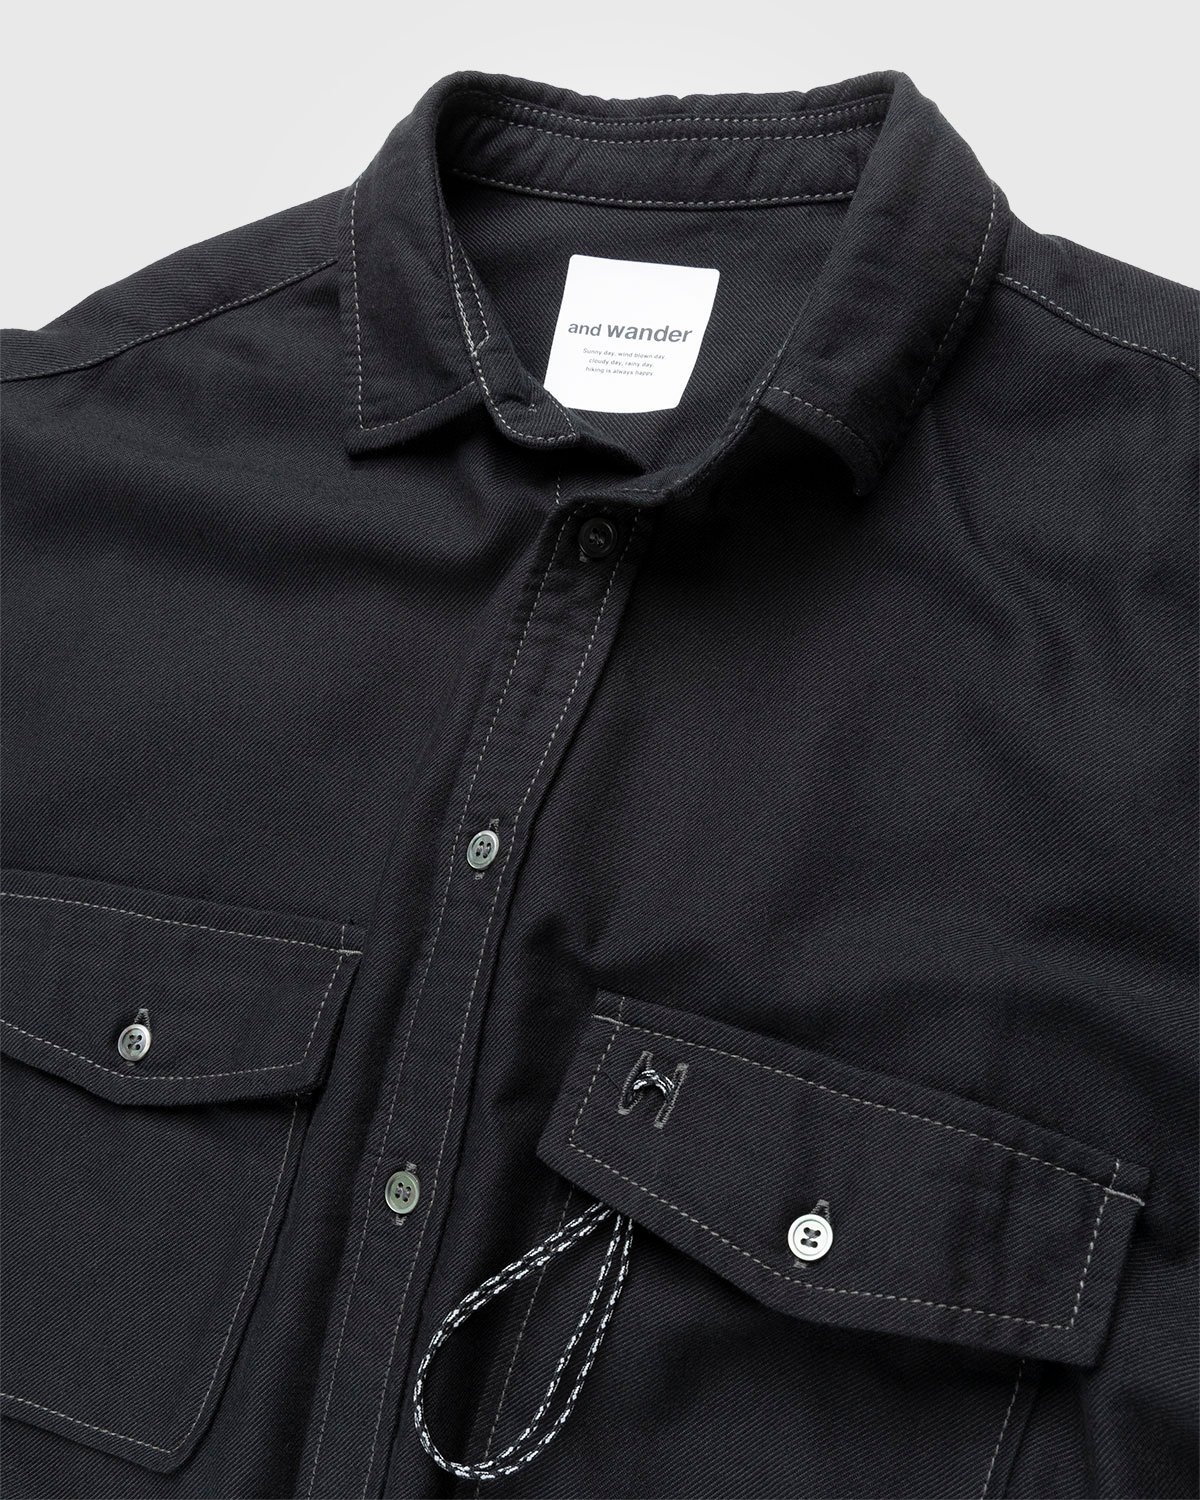 And Wander – Thermonel Pullover Shirt (M) Black - Overshirt - Black - Image 4